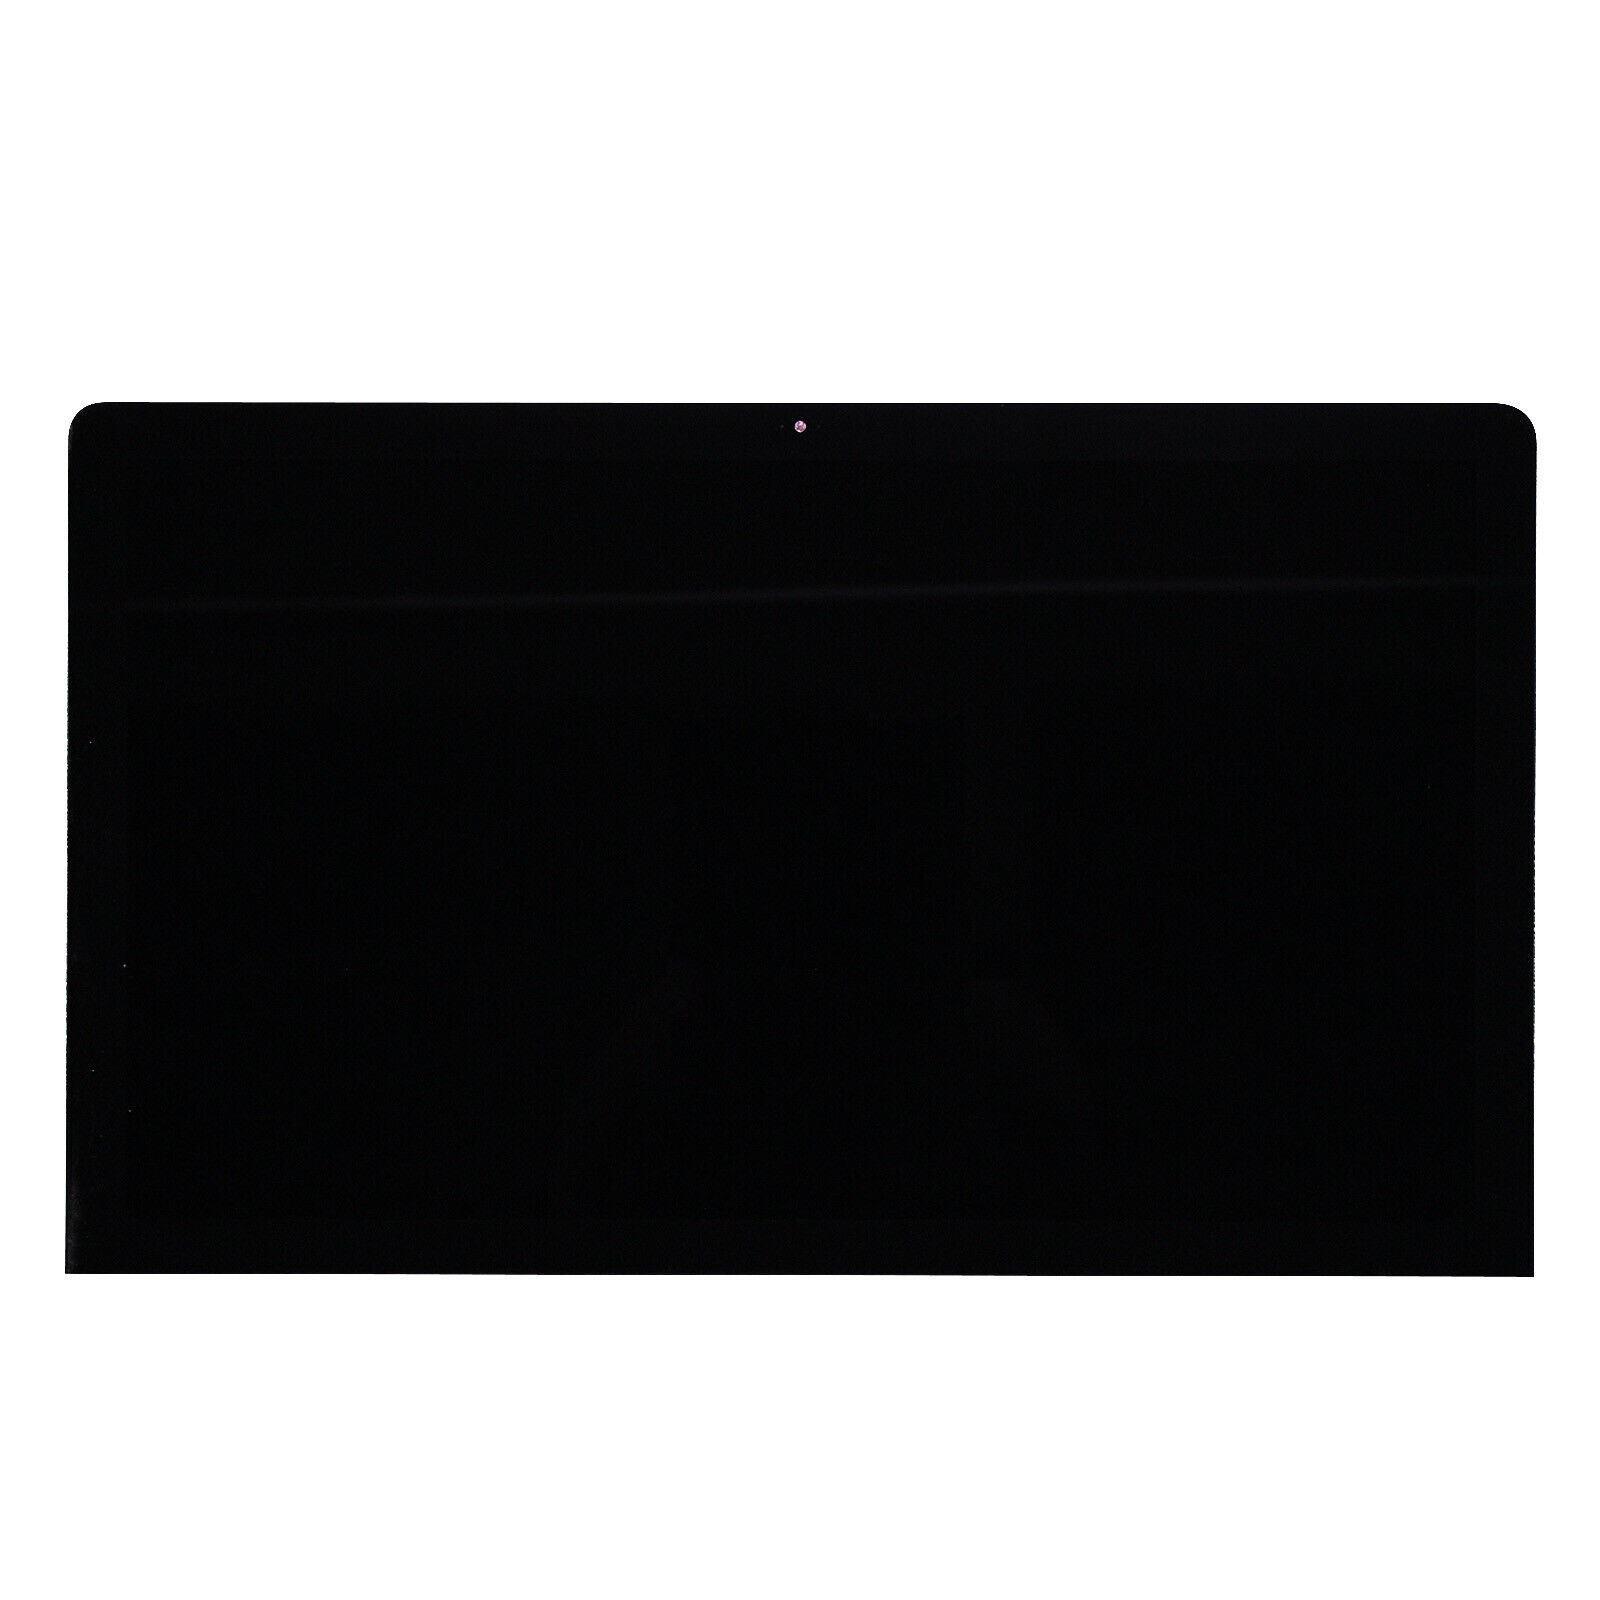 A1419 LM270QQ1 SDB 661 03255 lcd panel and front glass assembly imac 27 late 2015